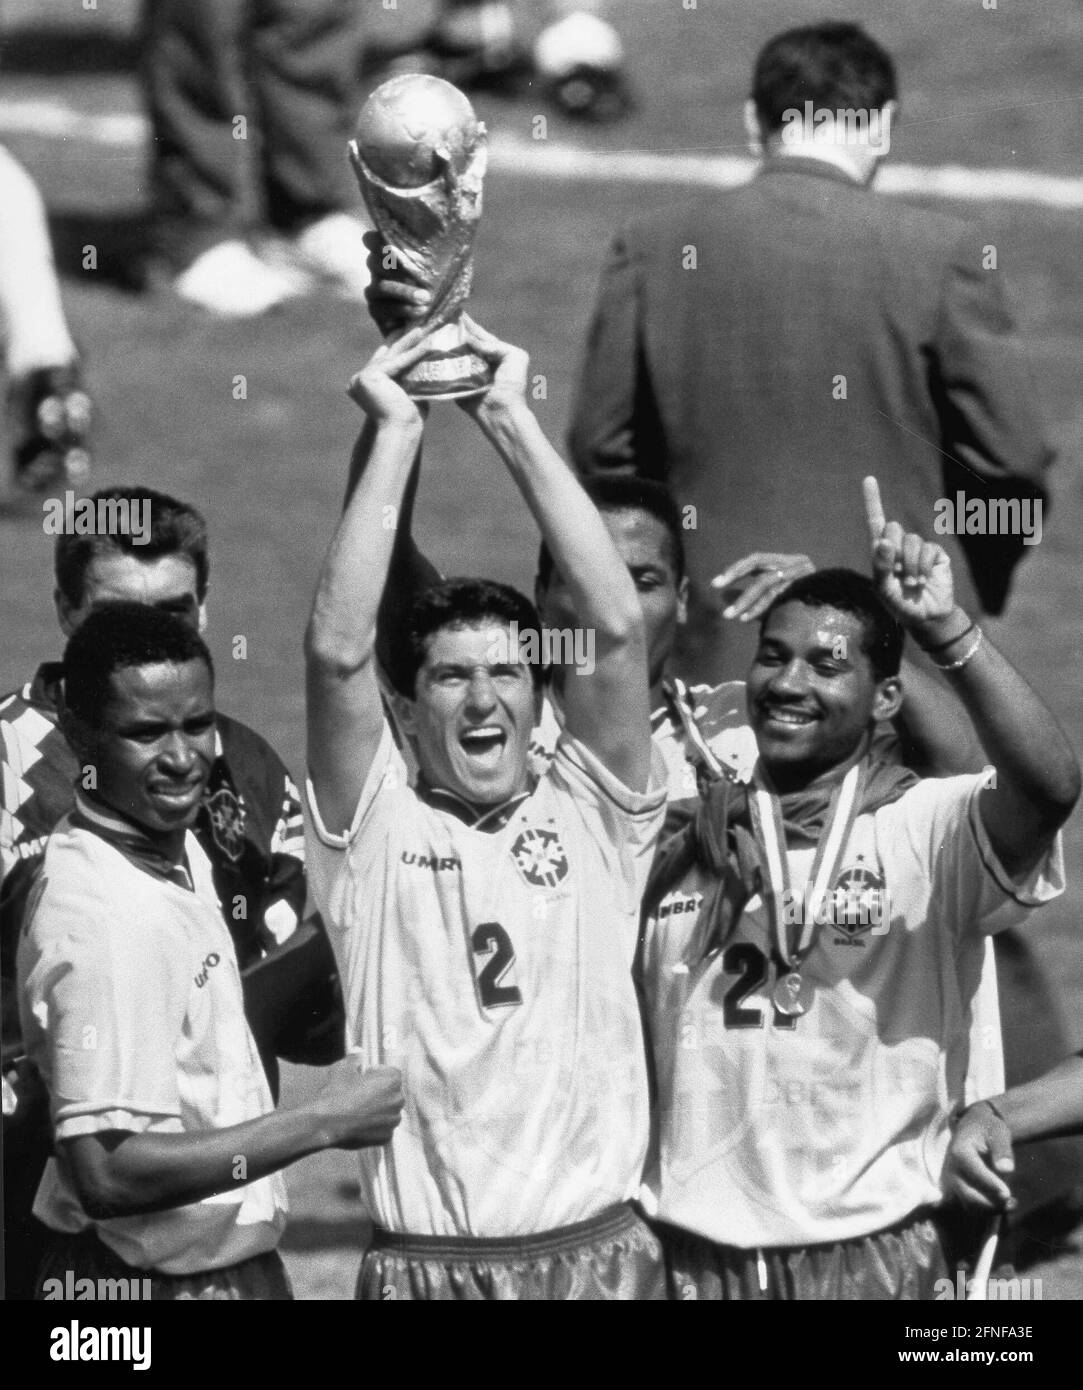 Date of photo: 17.07.1994 The Brazilian national player Jorginho with the World Cup trophy after the 3:2 victory of the Brazilians in the final over Italy at the World Cup in the USA. [automated translation] Stock Photo